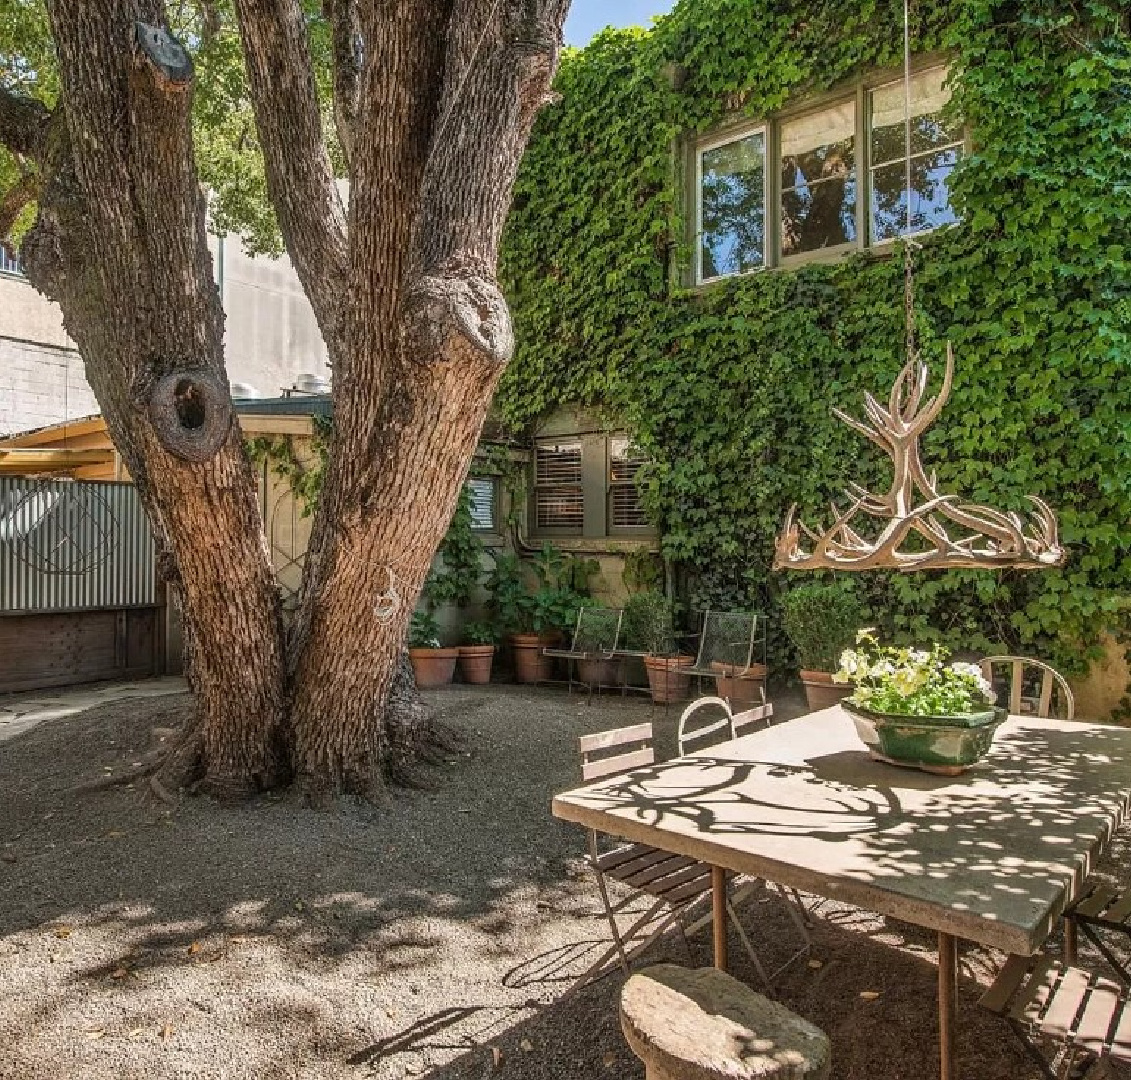 Lush garden at 1935 ivy covered Southern California cottage with Parisian style interiors by Myra Hoefer. #ivycovered #californiacottage #myrahoefer